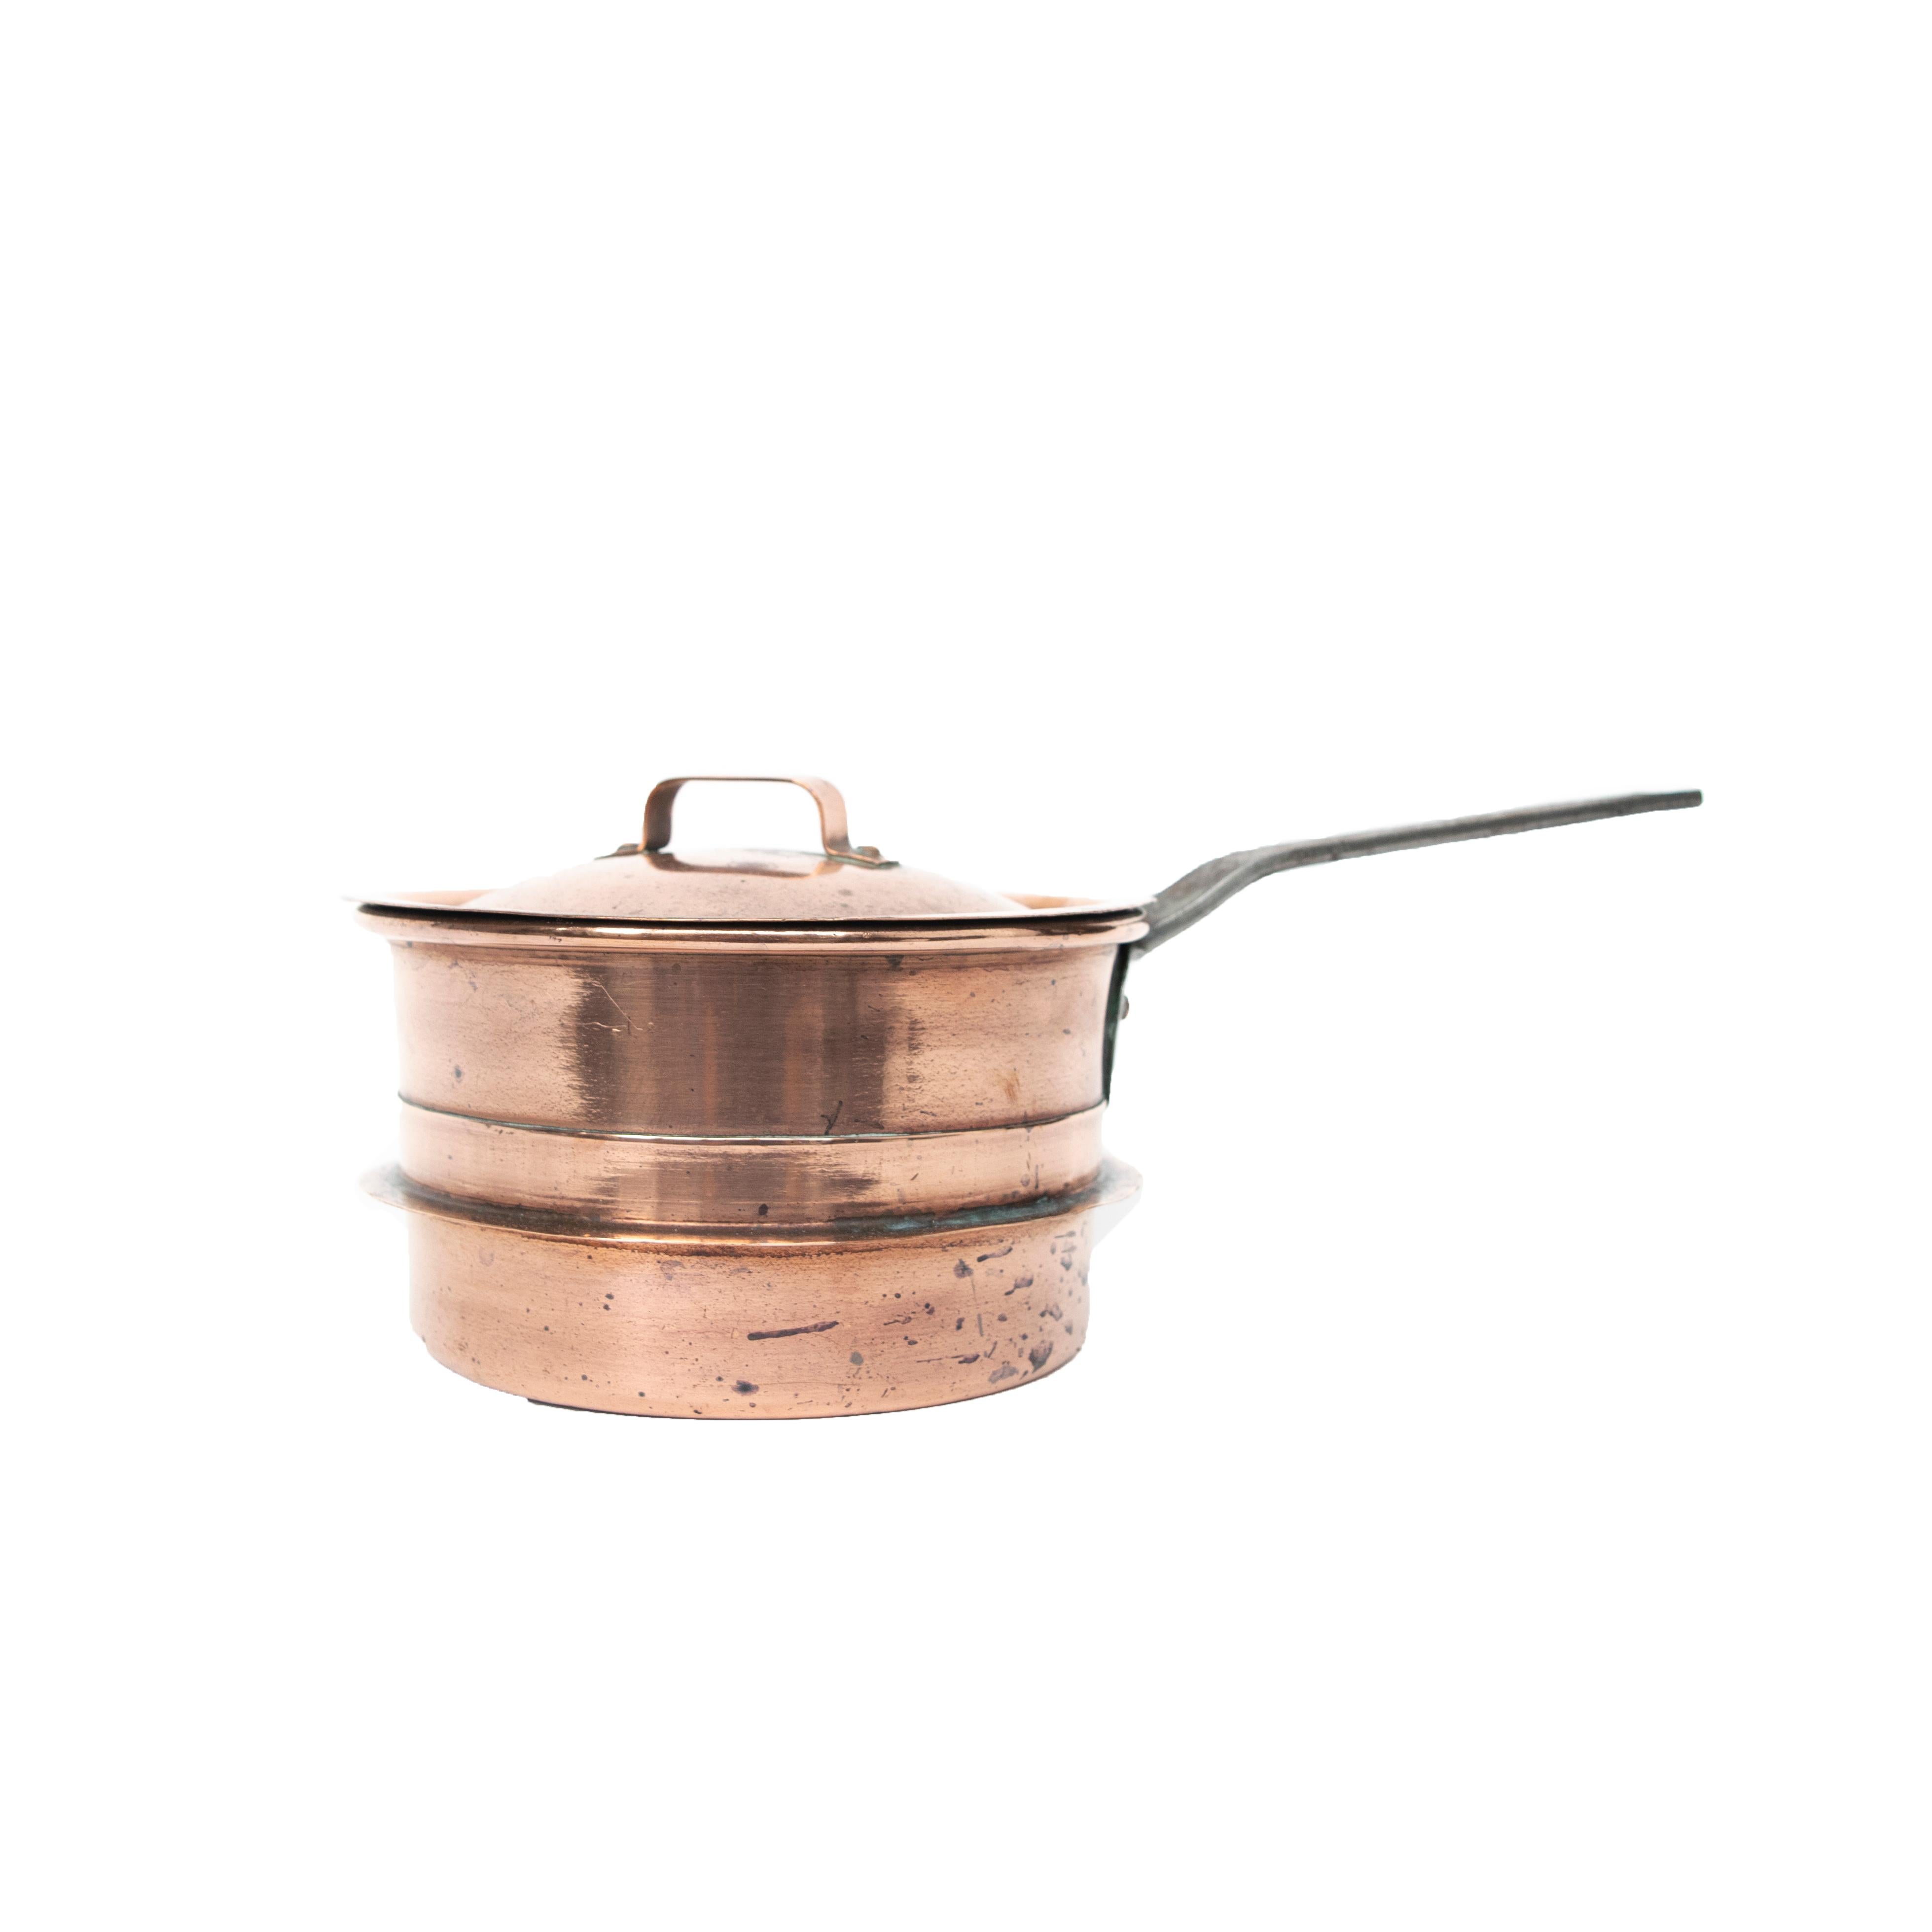 Jugendstil Antique Copper Saucepan with Cast Iron Handle Medium Size from Sweden, Late 1800 For Sale